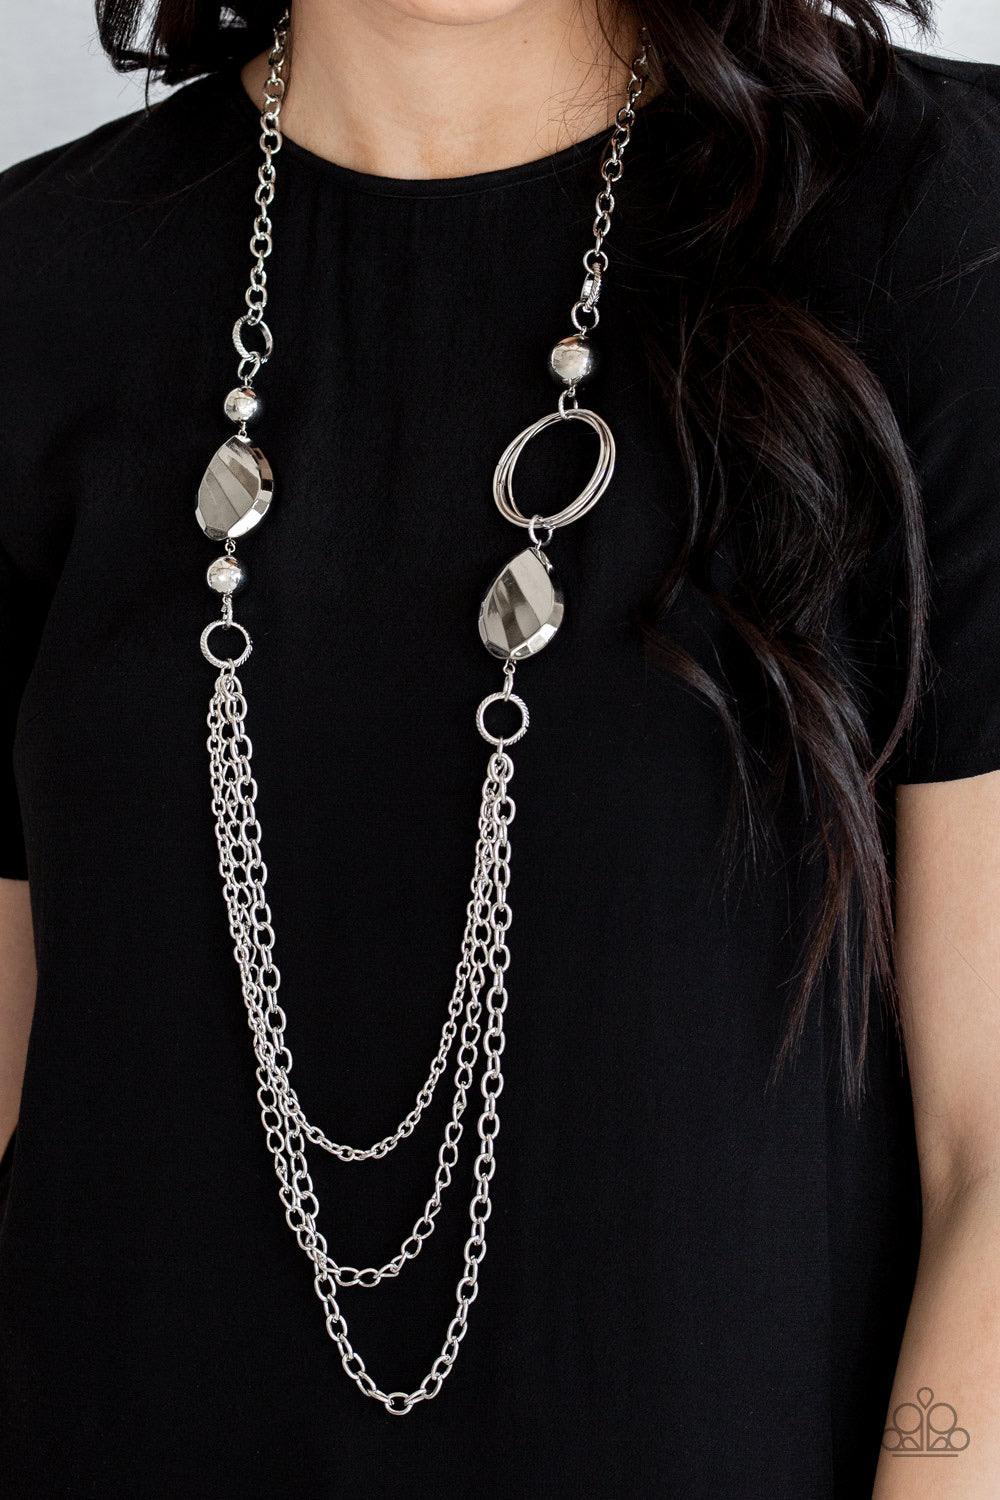 Paparazzi Accessories Rebels Have More Fun - Silver A mismatched collection of oversized silver beads, hoops, and textured silver accents give way to layers of antiqued silver chains down the chest for an edgy industrial look. Features an adjustable clasp